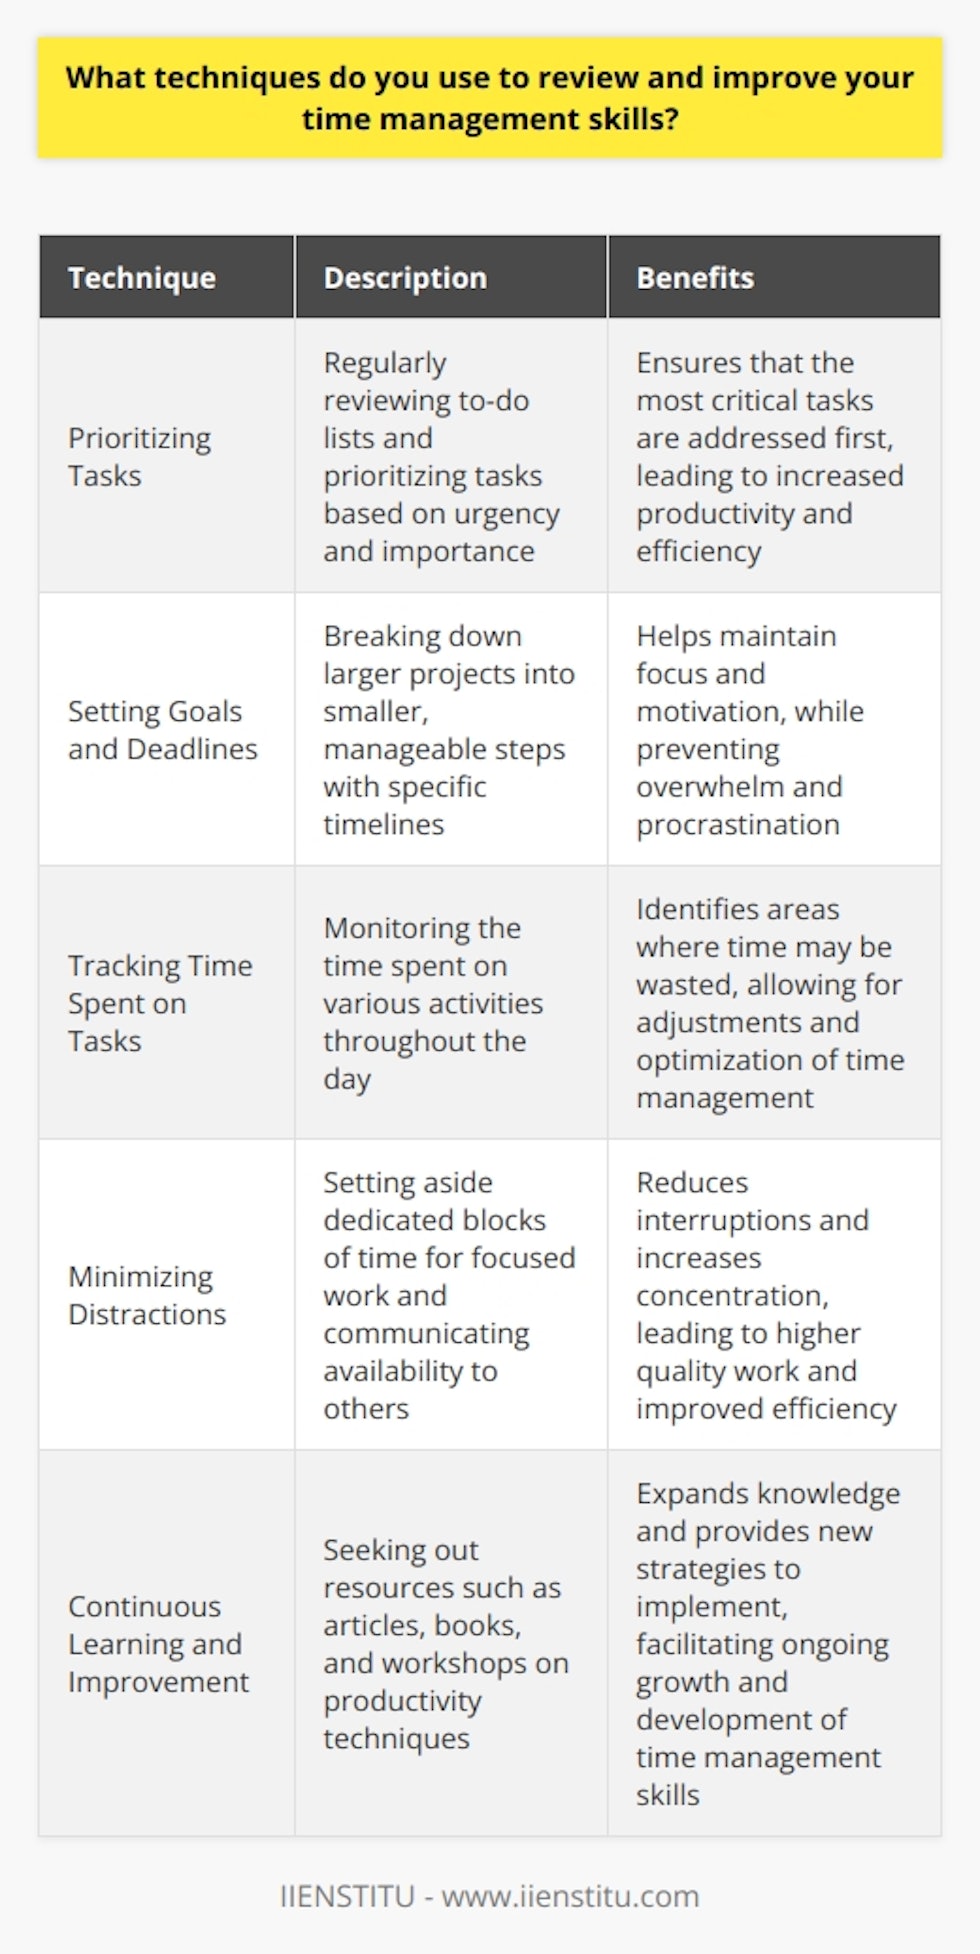 I continuously evaluate my time management skills to ensure maximum productivity and efficiency in my work. One technique I use is regularly reviewing my to-do lists and prioritizing tasks based on urgency and importance. Setting Goals and Deadlines I find that setting clear goals and deadlines for each task helps me stay focused and motivated. I break down larger projects into smaller, manageable steps with specific timelines to avoid feeling overwhelmed. Tracking Time Spent on Tasks Another strategy I employ is tracking the time I spend on various activities throughout the day. This allows me to identify areas where I may be spending too much time and adjust accordingly. Minimizing Distractions To further optimize my time management, I actively work on minimizing distractions such as unnecessary emails, social media, or chatty coworkers. I set aside dedicated blocks of time for focused work and communicate my availability to others. Continuous Learning and Improvement I believe in the importance of continuous learning and improvement when it comes to time management skills. I regularly seek out articles, books, and workshops on productivity techniques to expand my knowledge and find new strategies to implement in my daily routine. By consistently applying these techniques and regularly assessing my progress, I am able to fine-tune my time management abilities and achieve a healthy work-life balance while delivering high-quality results in my job.